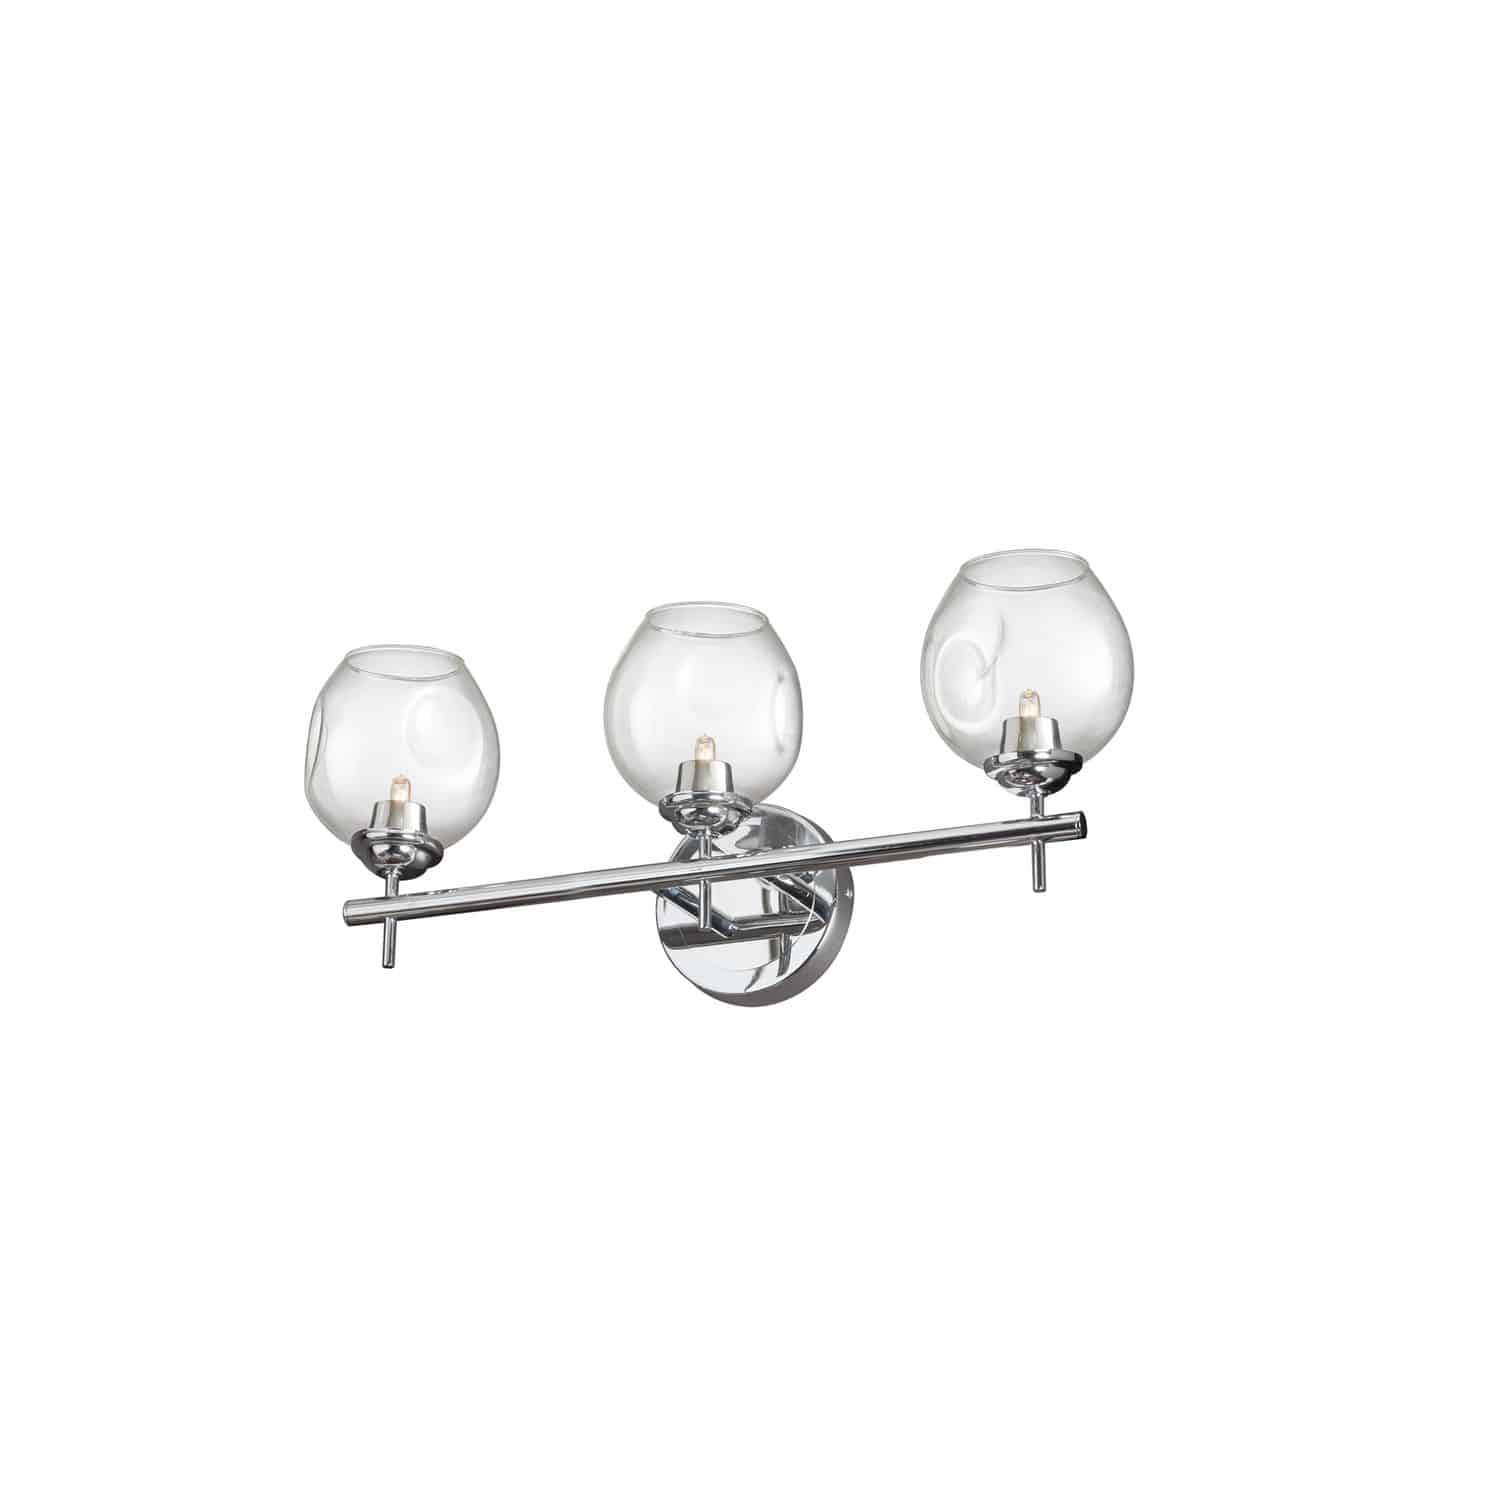 The eye-catching contrast of glass globes and sleek straight lines form the basis of the ABII family of lighting fixtures. It's a versatile and adaptable design with options ranging from a single sconce to a large pendant light in a look that can work with virtually any room or design scheme. The metal base and arms create a pattern to showcase the reflective effects of the glass globes. Colorway options include complementary finishes from warm to stylishly dramatic. Halogen lights add a warm glow.  From ultra-modern minimalism to mid-century and even more traditional décors, the ABII family of lightings transitional design is both luxurious and timeless in its appeal.